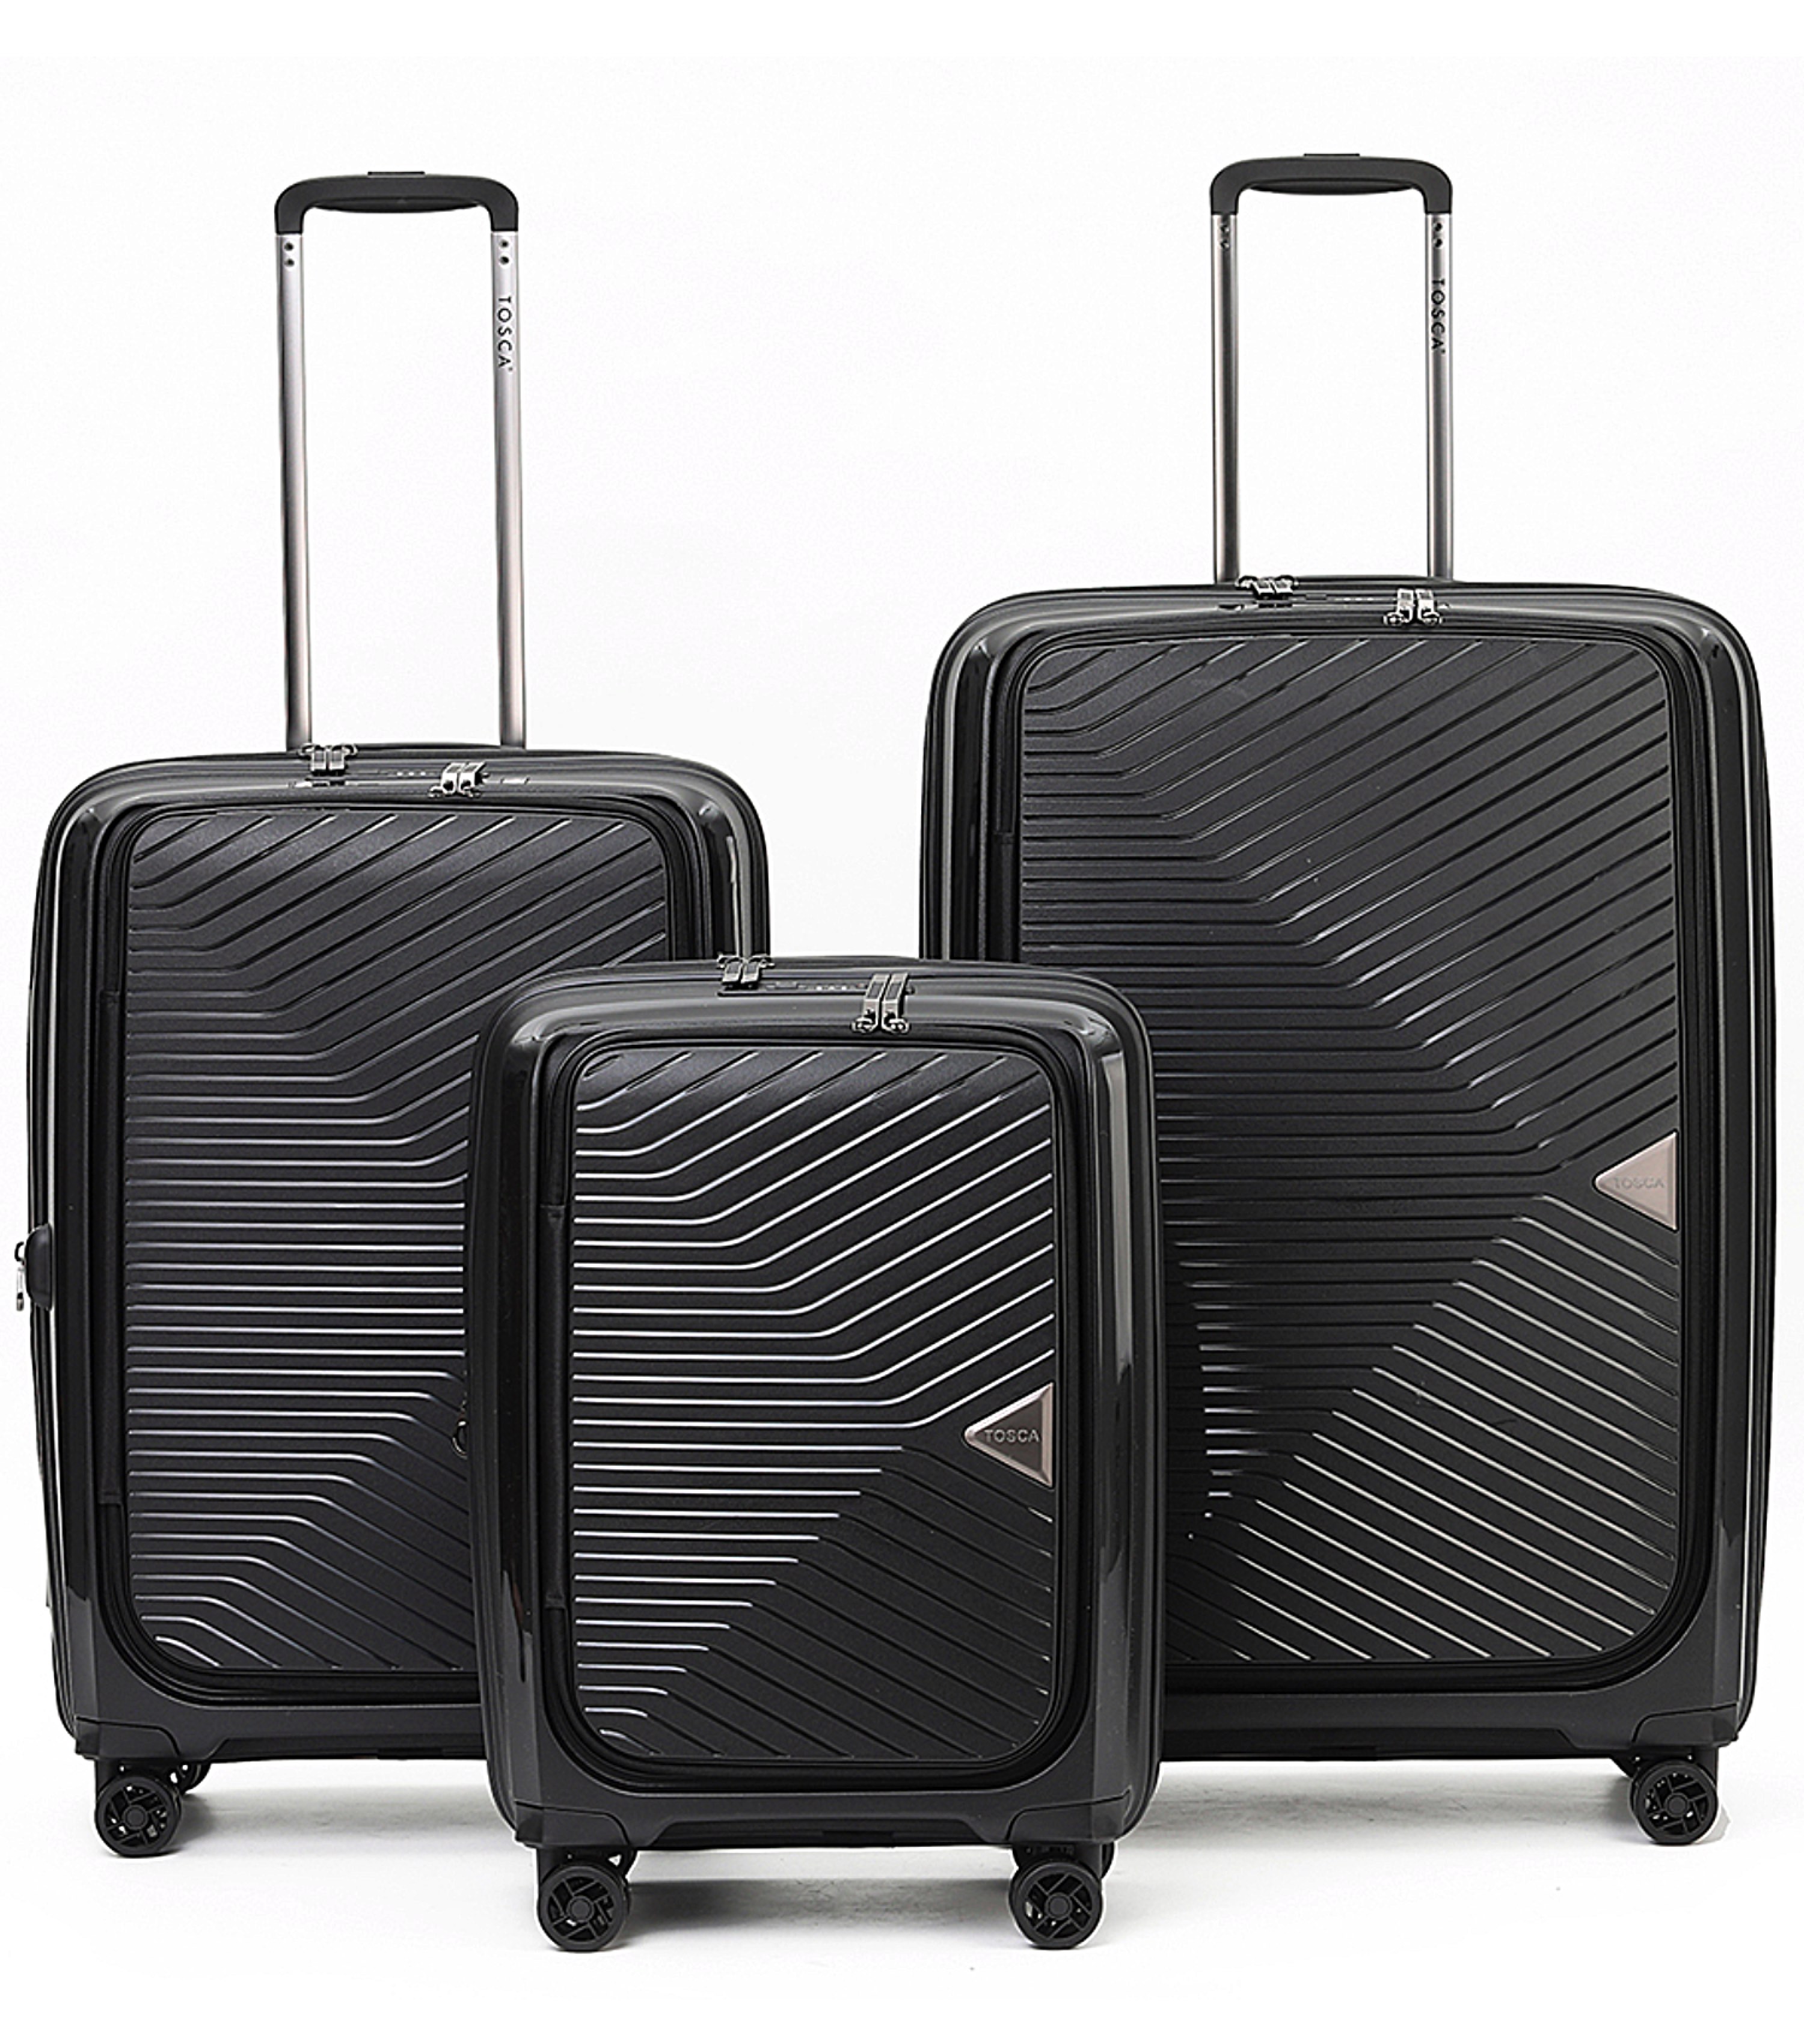 Tosca Space-X 4 Wheel Expandable Luggage Set of 3 - Black (Small ...